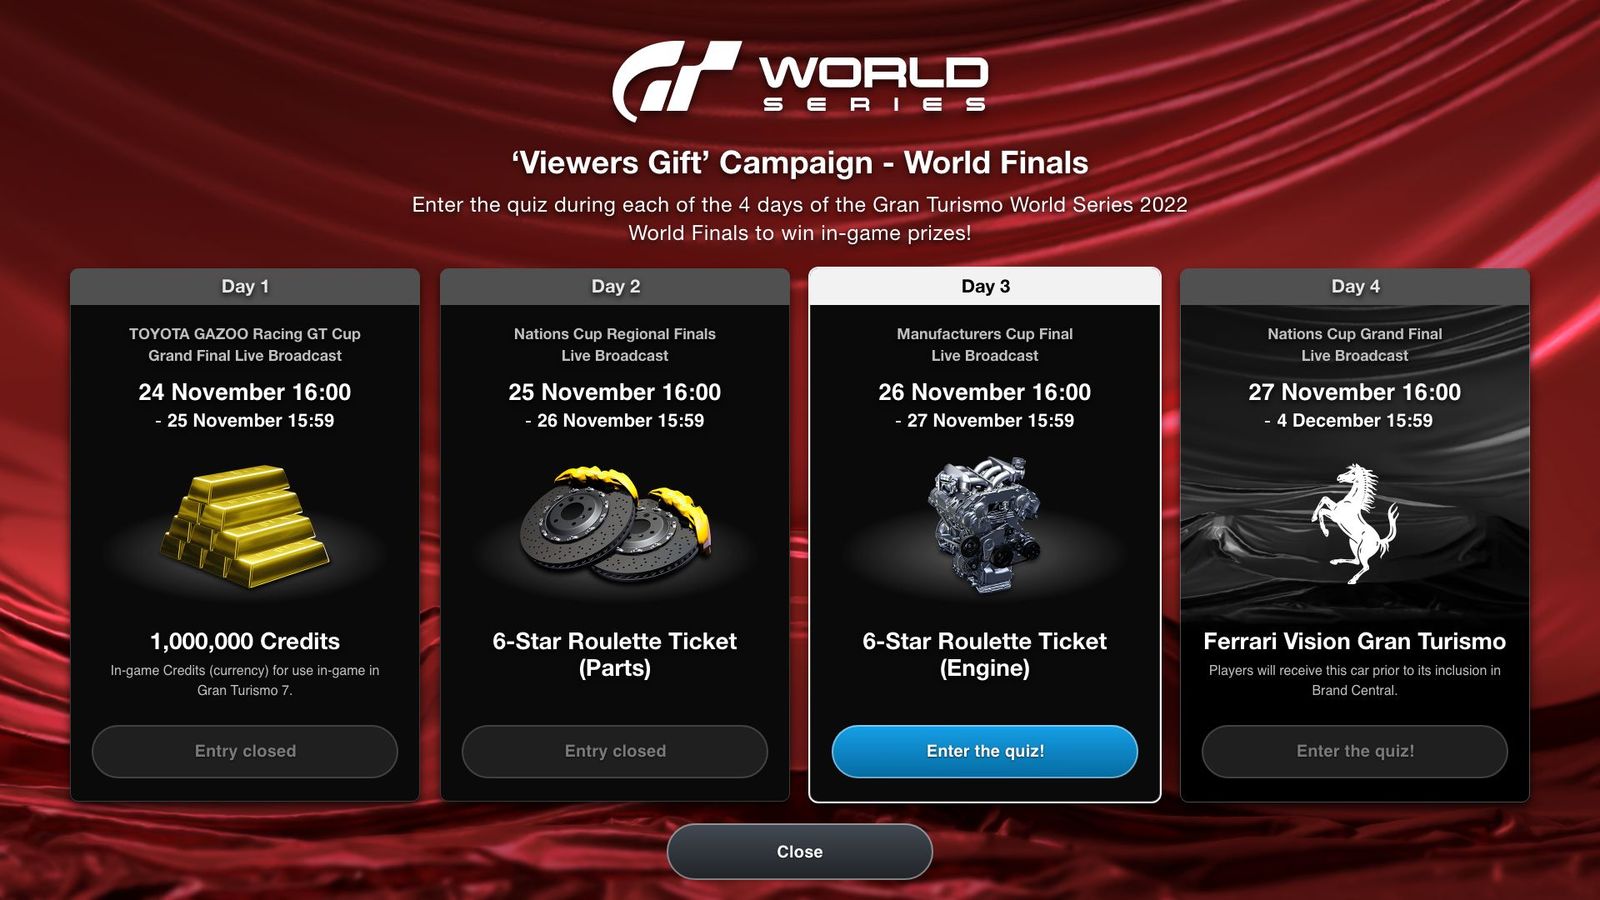 Gran Turismo 7 Viewers Gift campaign